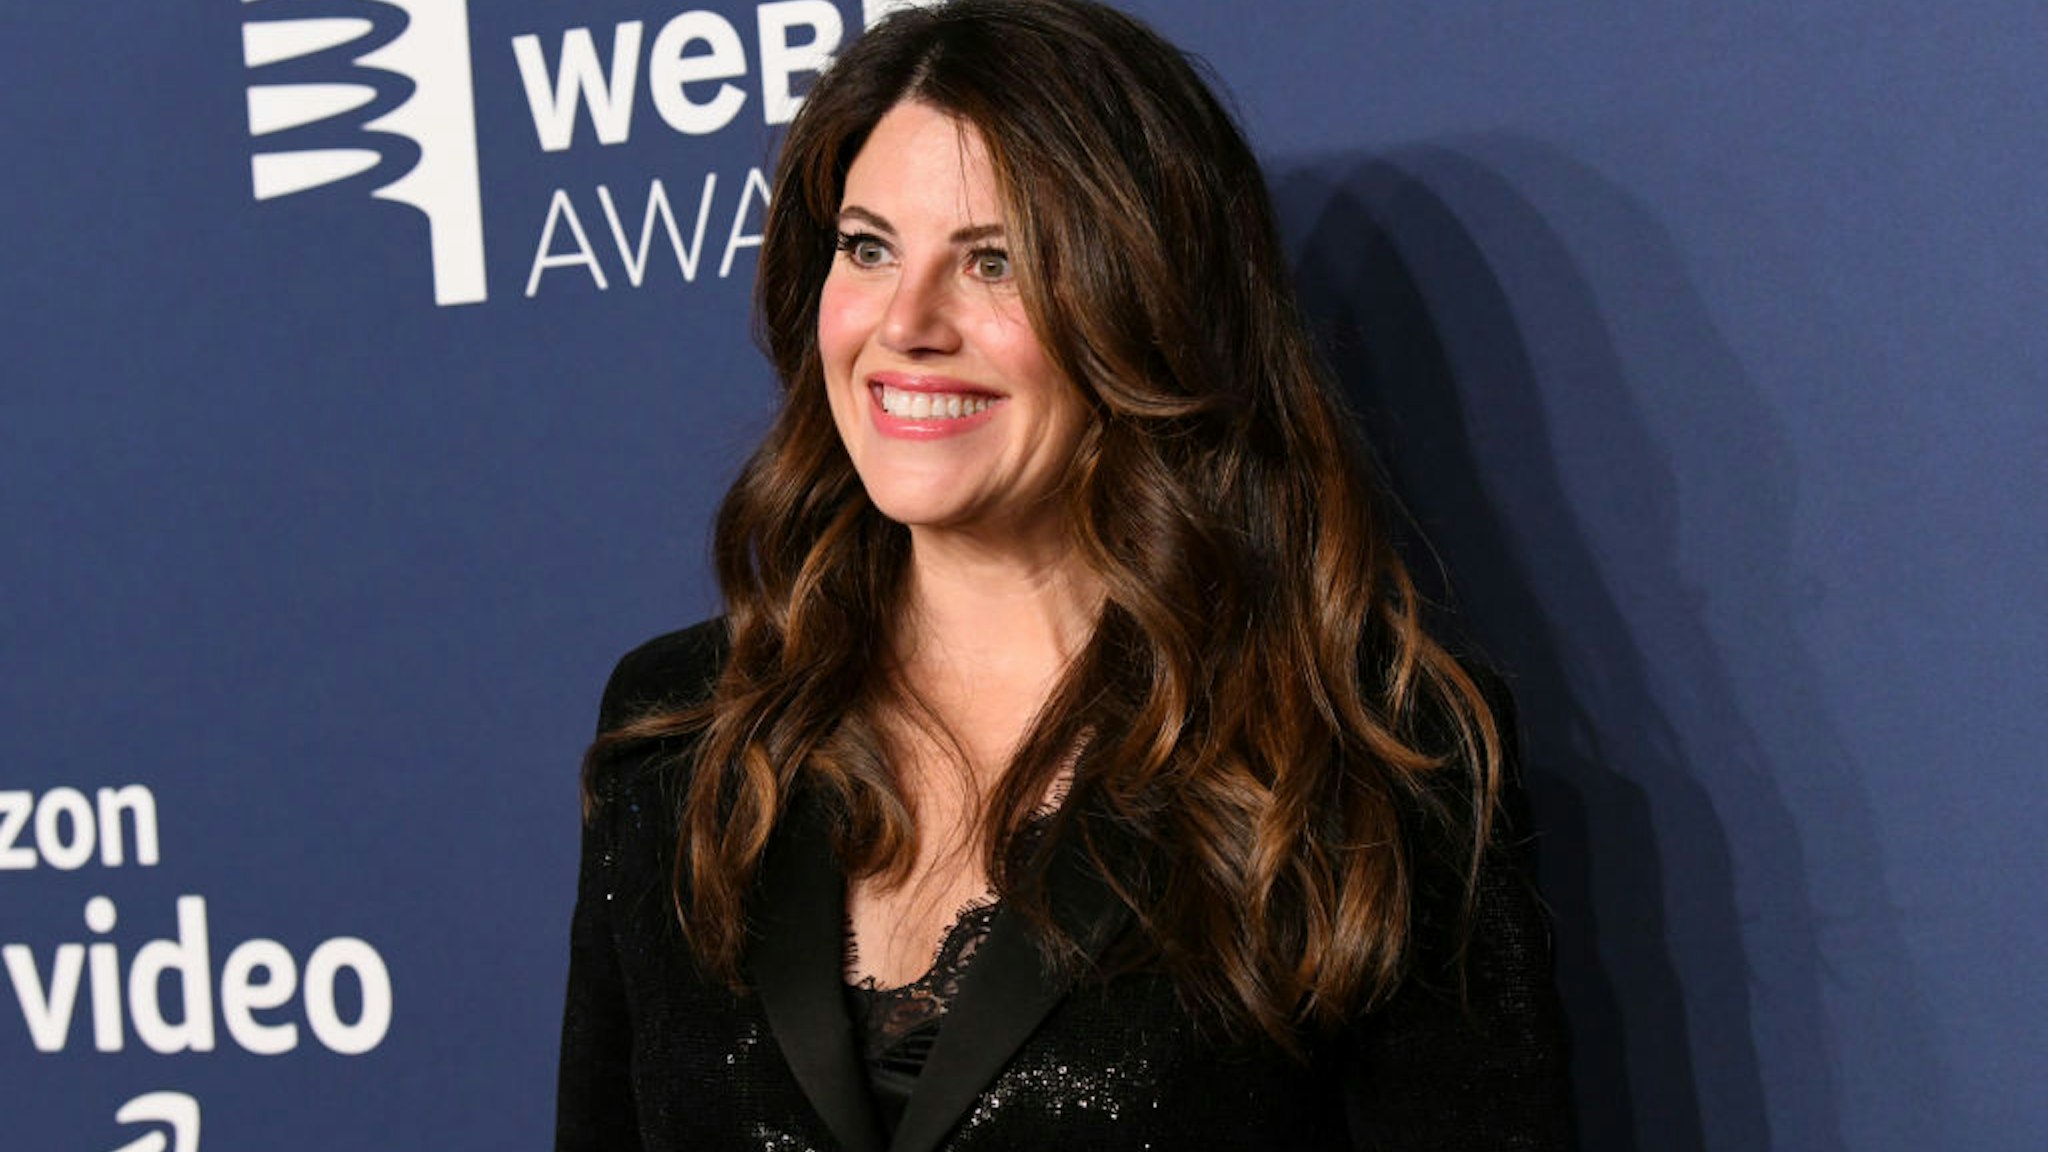 NEW YORK, NEW YORK - MAY 13: Monica Lewinsky attends The 23rd Annual Webby Awards on May 13, 2019 in New York City. (Photo by Noam Galai/Getty Images for Webby Awards)